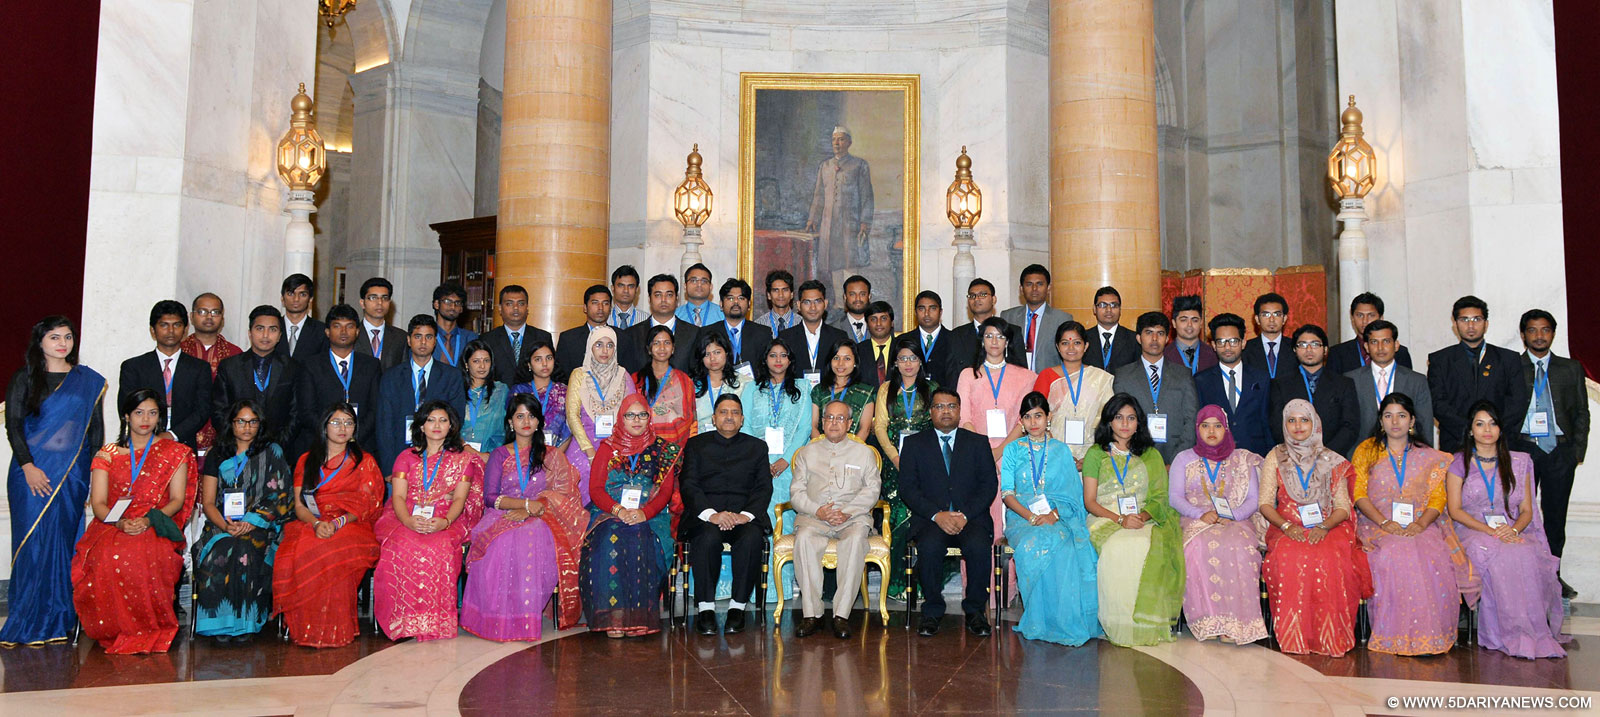 The President, Shri Pranab Mukherjee in a group photograph with the member of Youth Delegation from Bangladesh, at Rashtrapati Bhavan, in New Delhi on October 06, 2015.